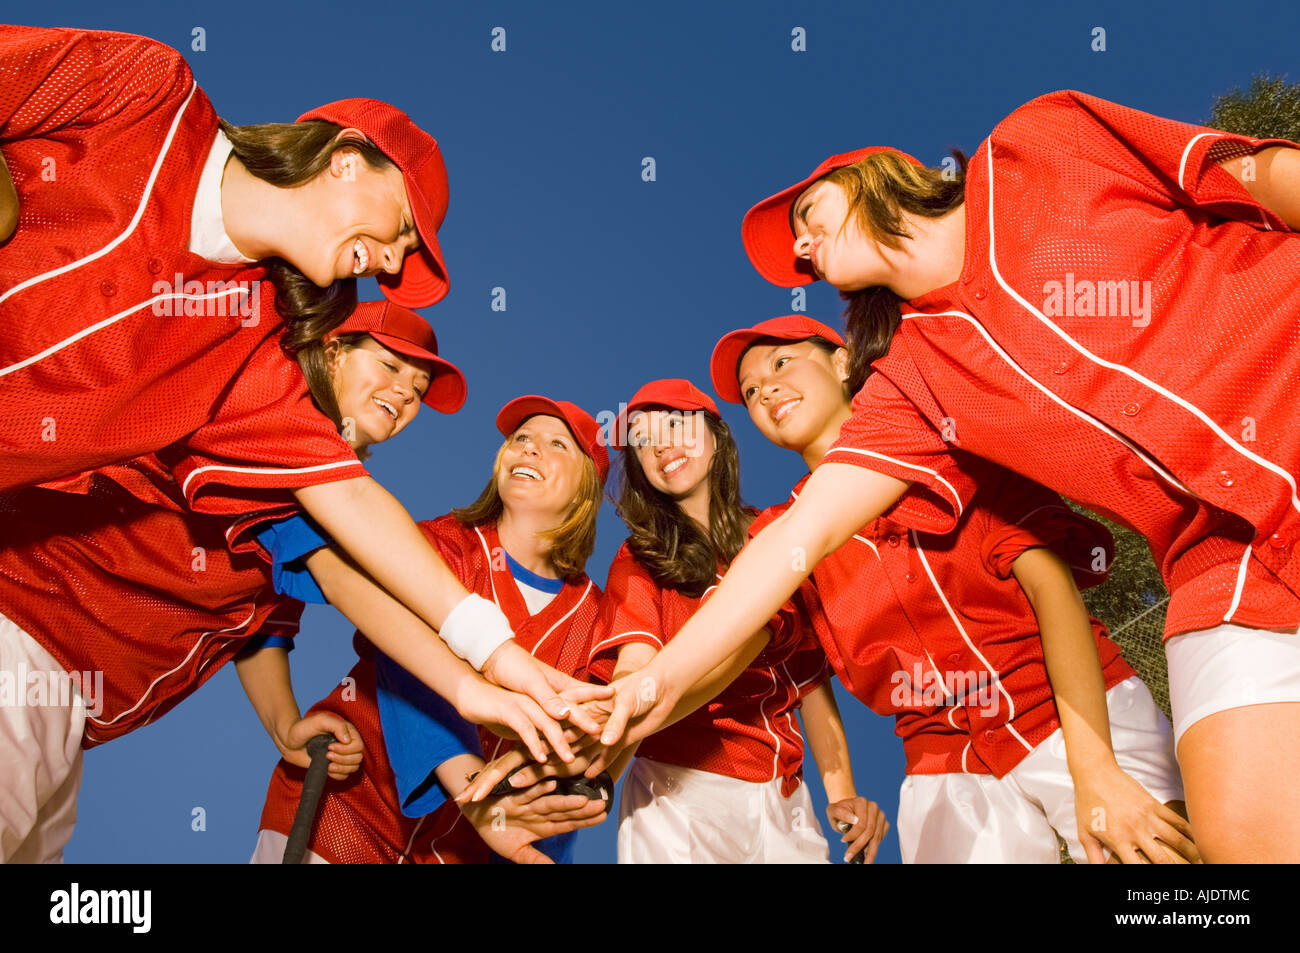 Women's softball team in huddle, low angle view Stock Photo